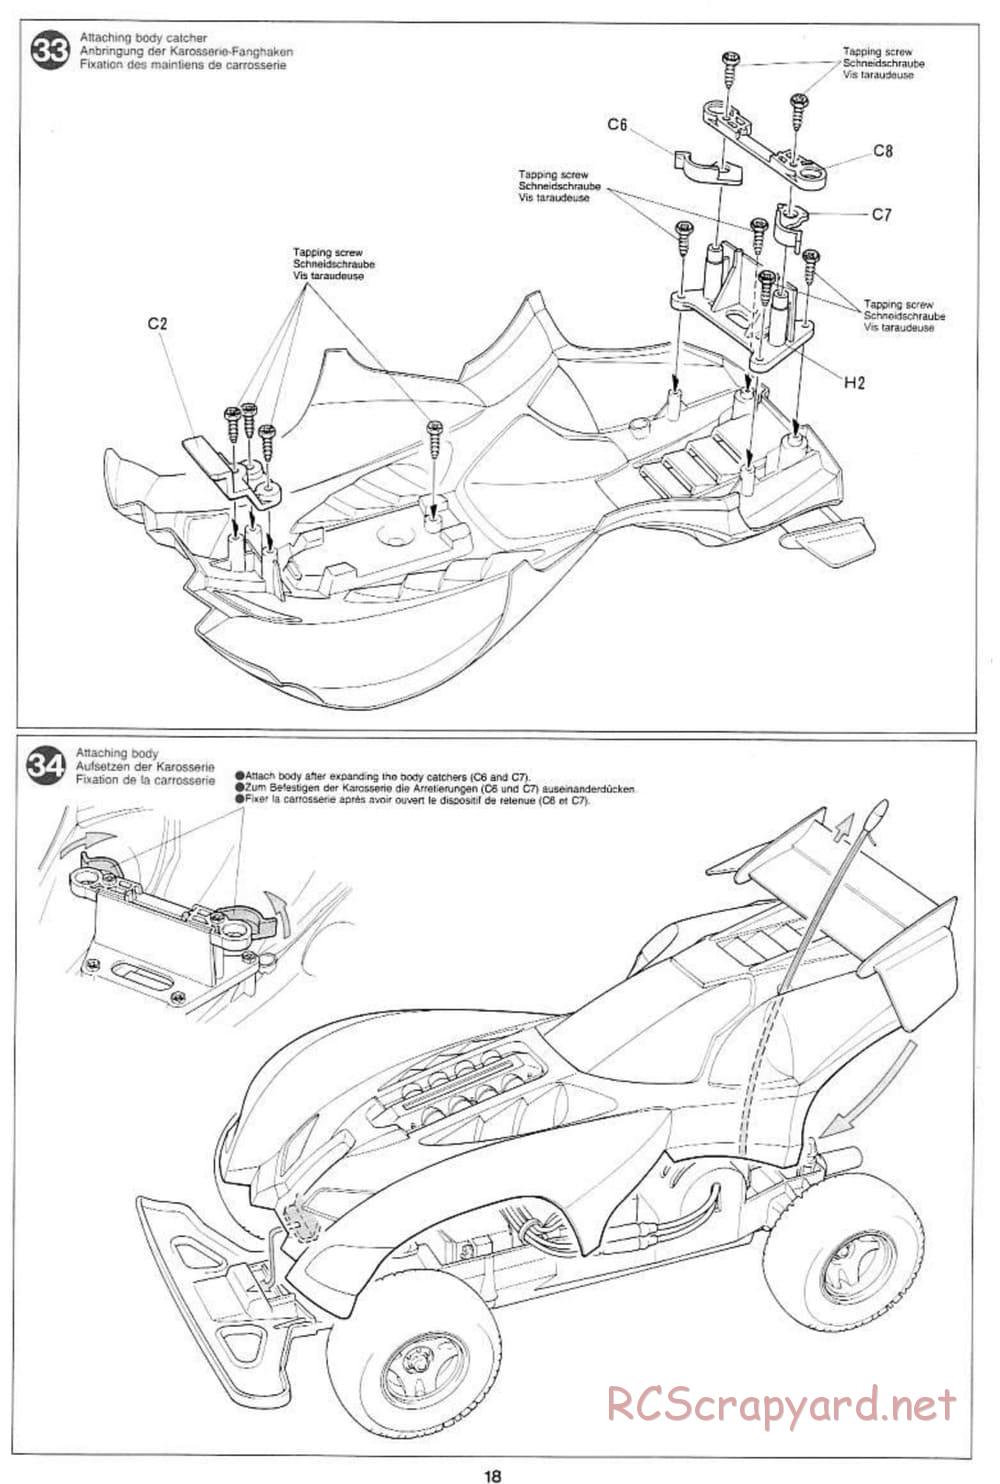 Tamiya - Wild Ceptor - Boy's 4WD Chassis - Manual - Page 18